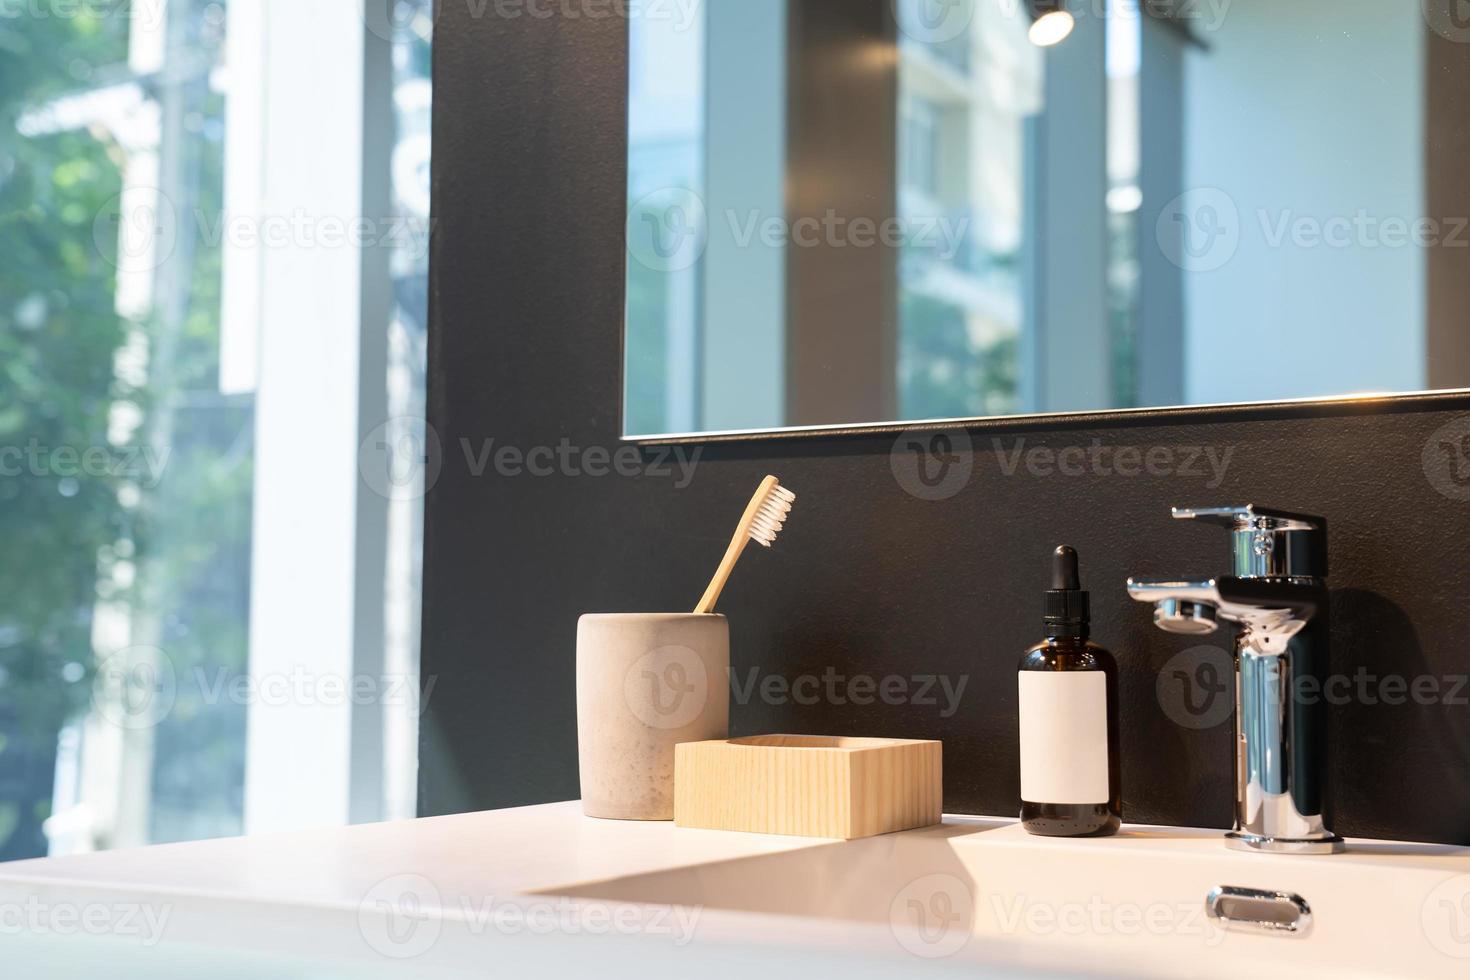 minimal toiletries such as toothbrush, serum bottle and wood storage on white sink and mirror on the black wall. photo